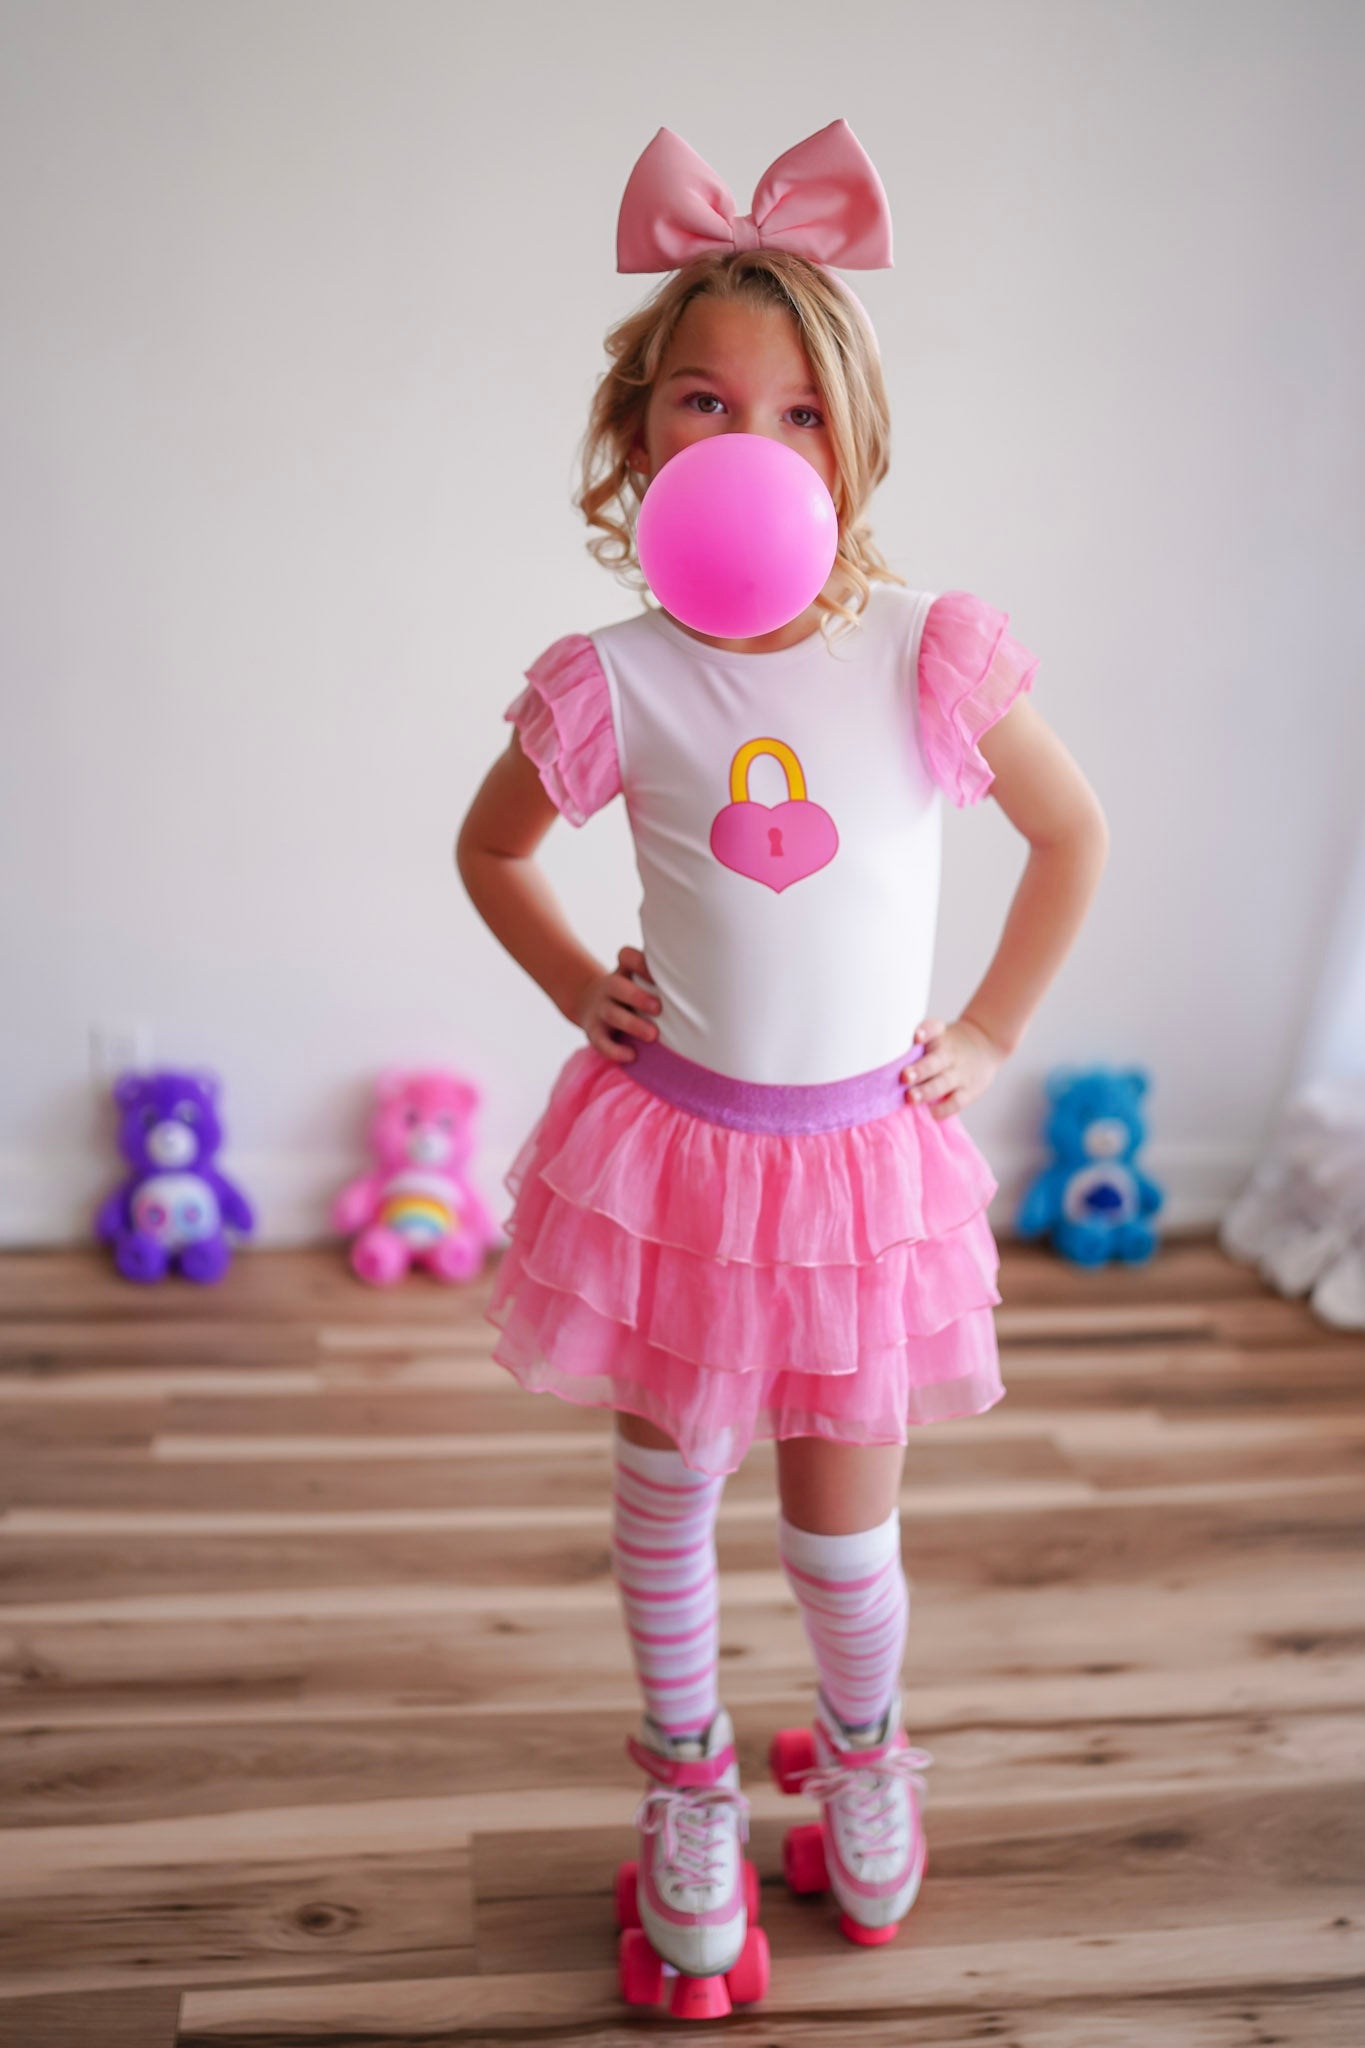 Beary Loved Cotton Candy Pink and White Leotard and Skort Set - Evie's Closet Clothing